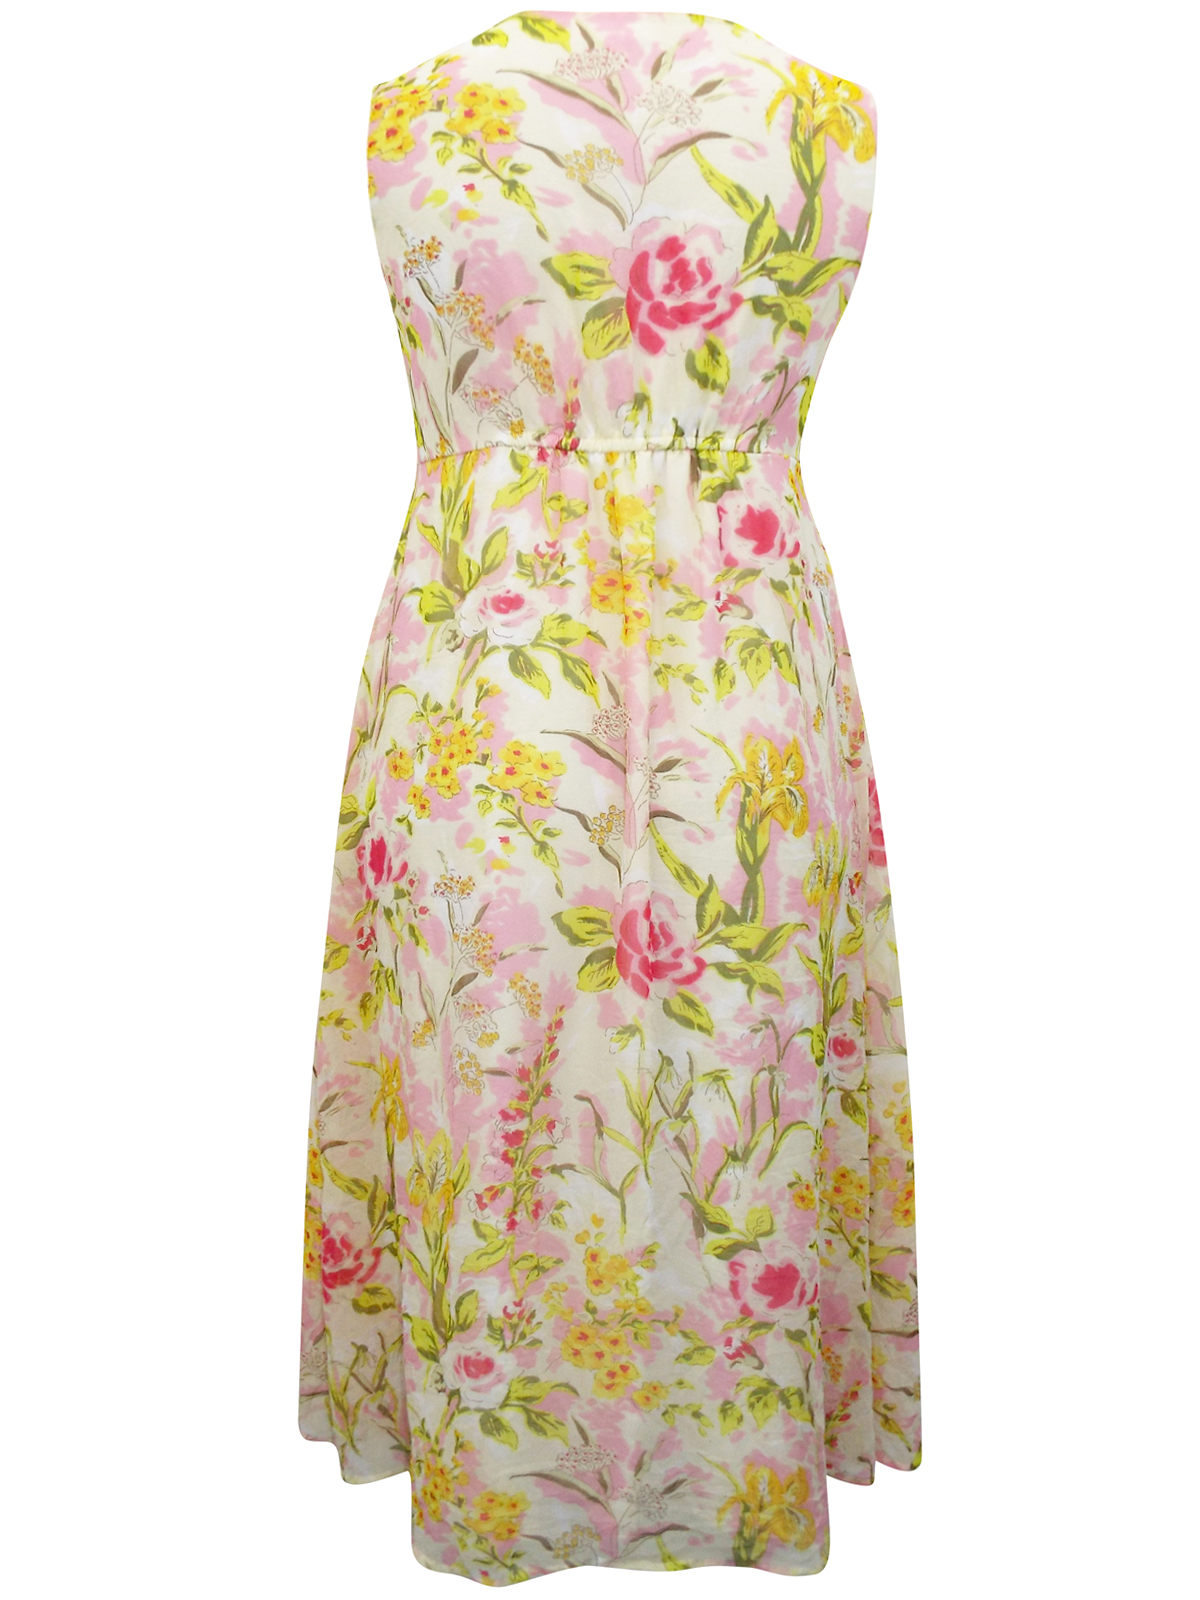 Together YELLOW Floral Print Maxi Dress - Plus Size 16 to 22